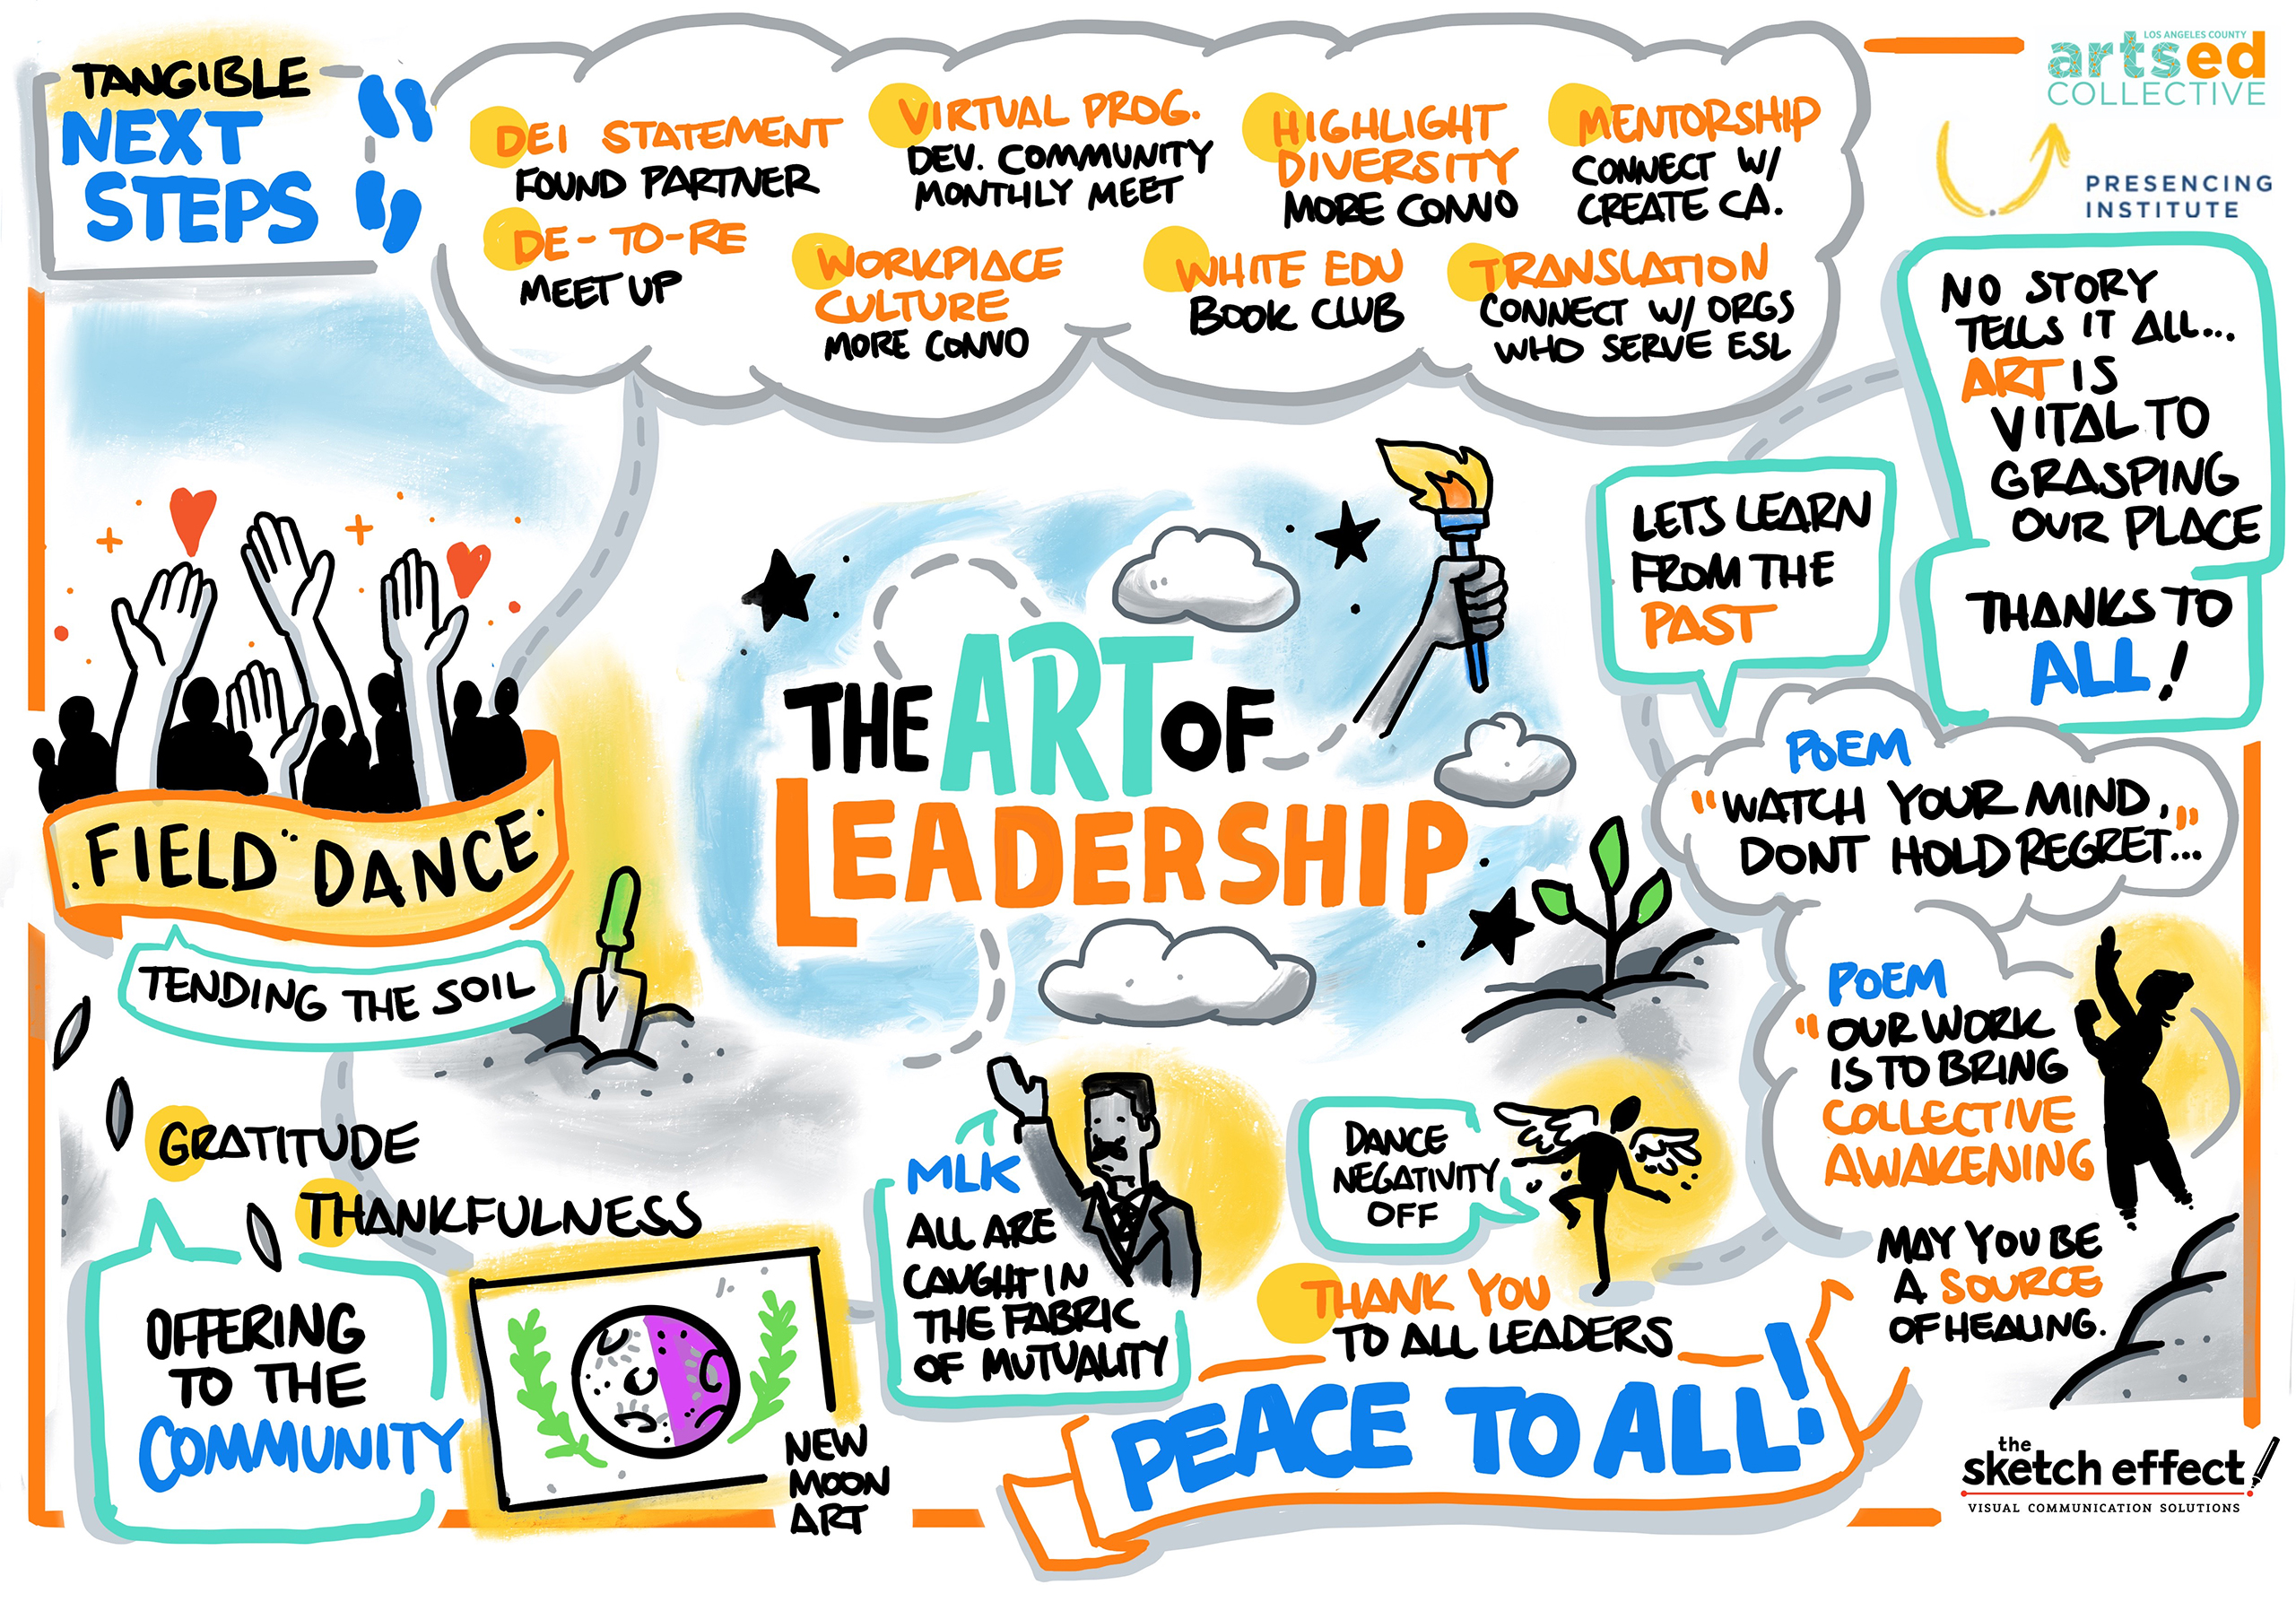 Graphic recording by The Sketch Effect titled "The Art of Leadership"